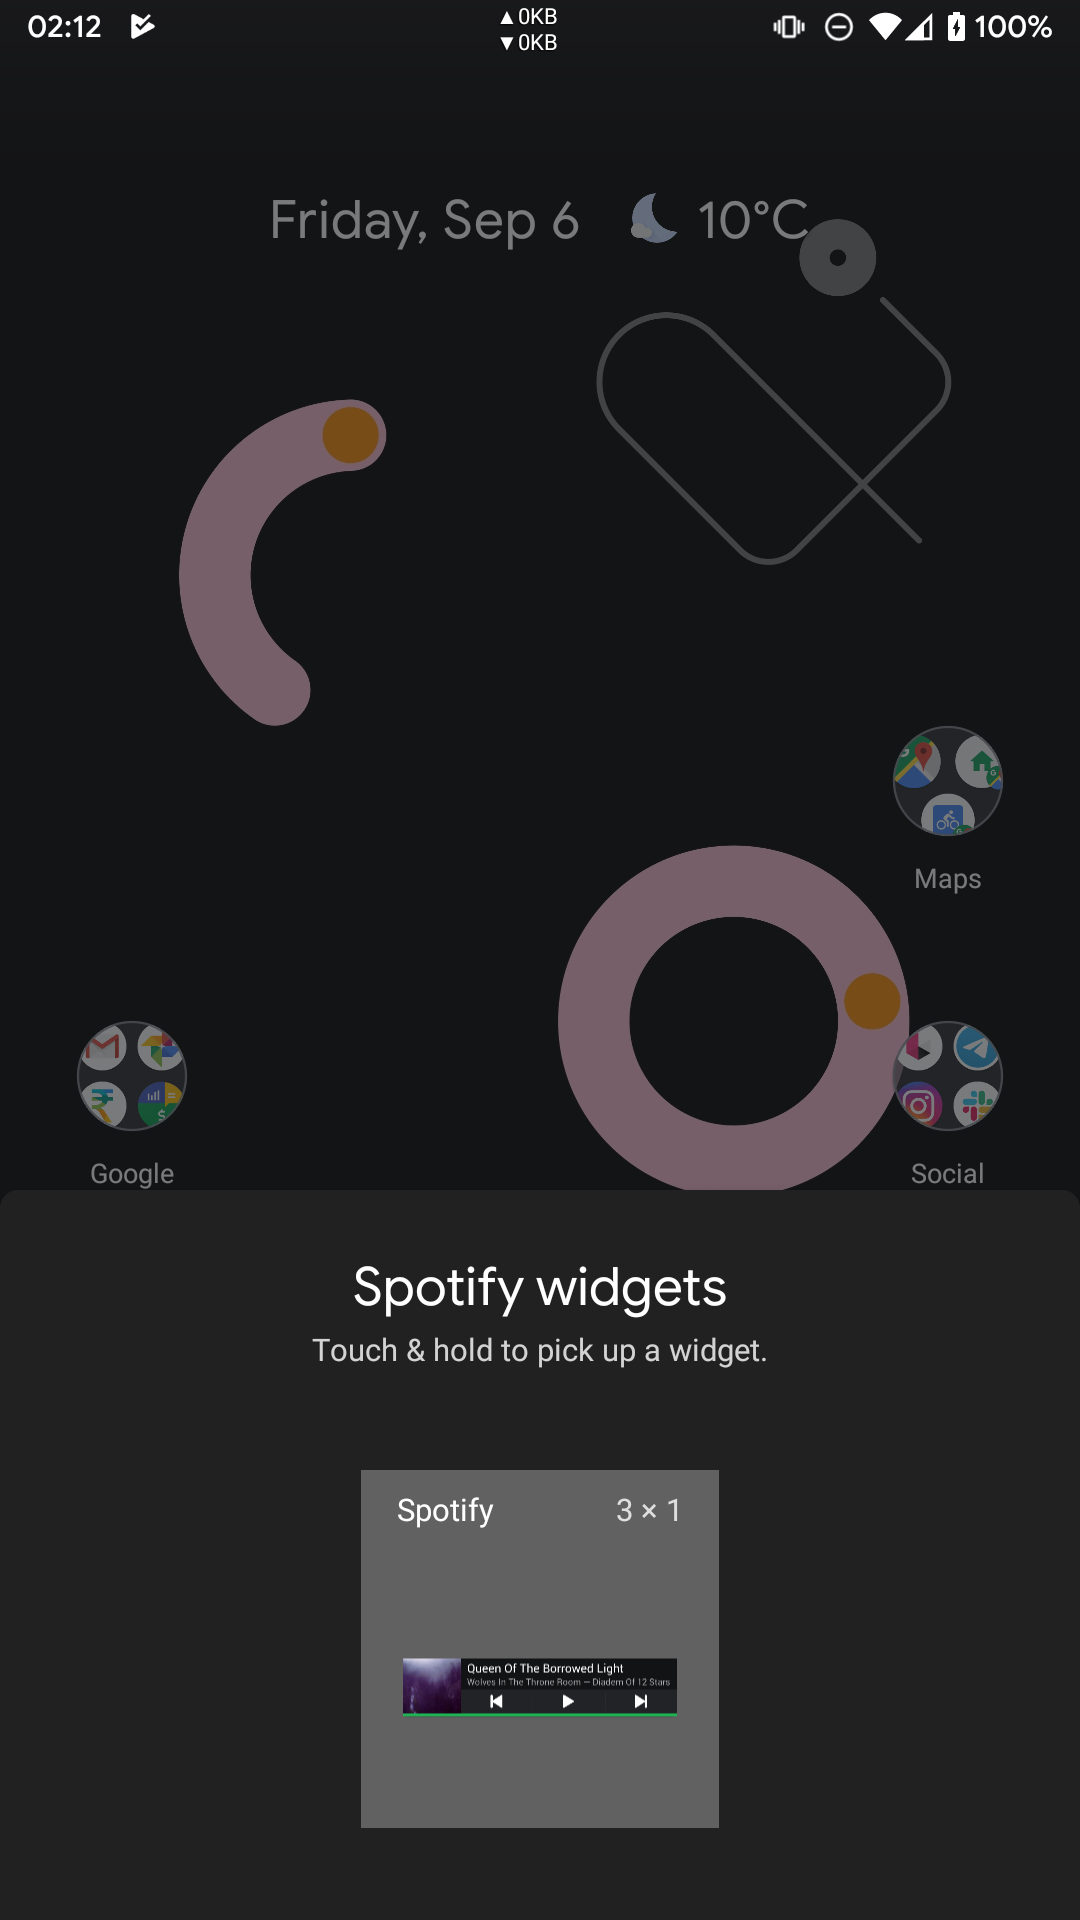 download the last version for android Spotify 1.2.16.947